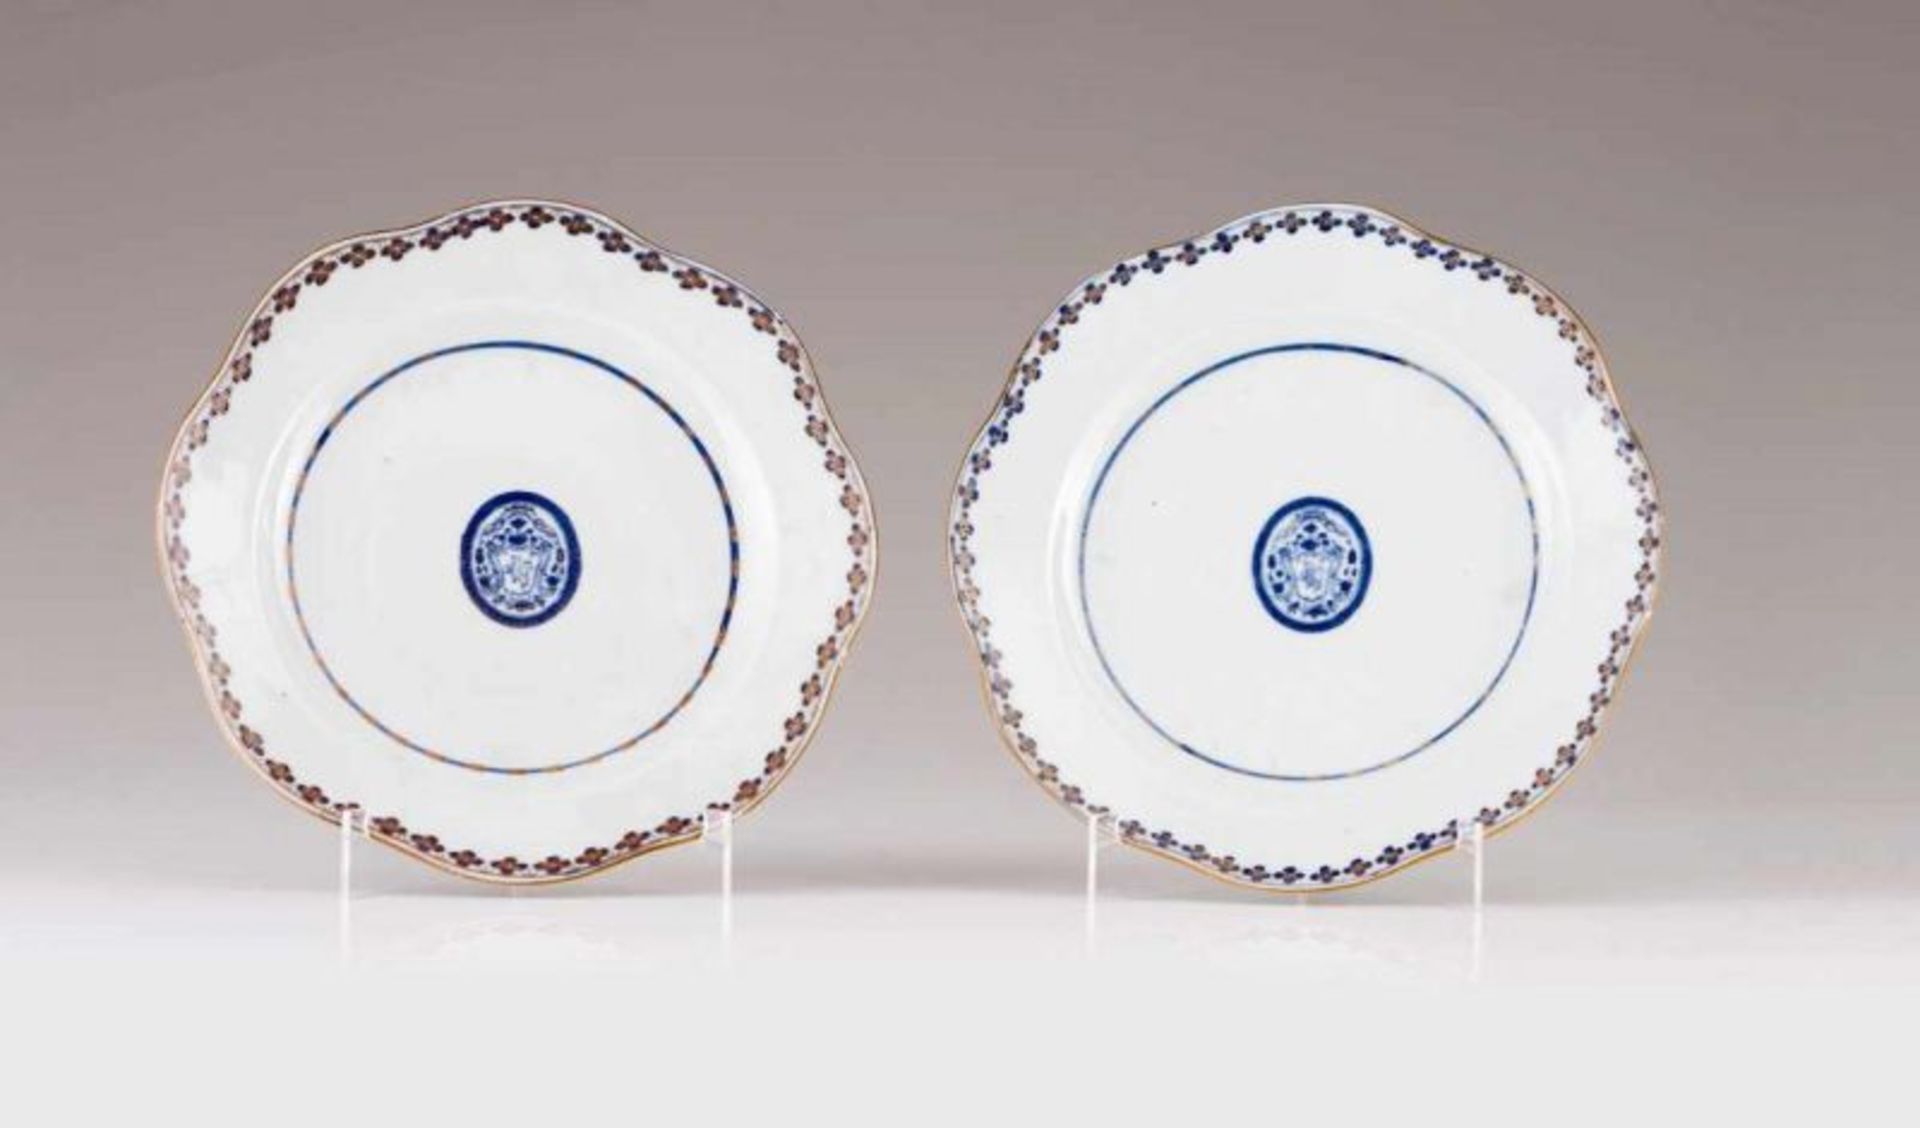 A scalloped plate Chinese export porcelain Blue underglaze decoration depicting coat-of-arms of D.